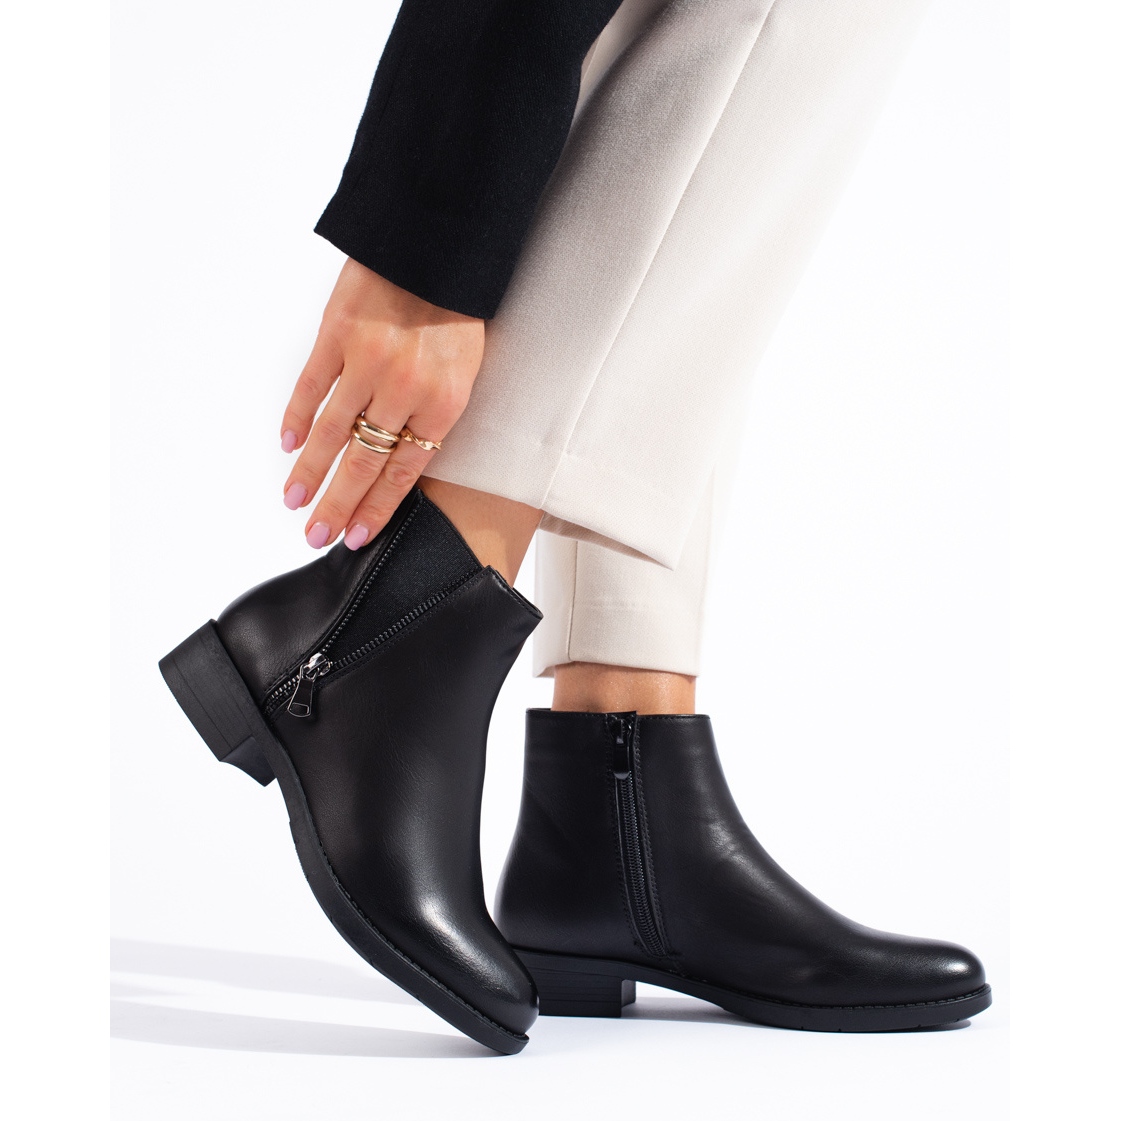 SHELOVET Classic low black ankle boots with a decorative zipper